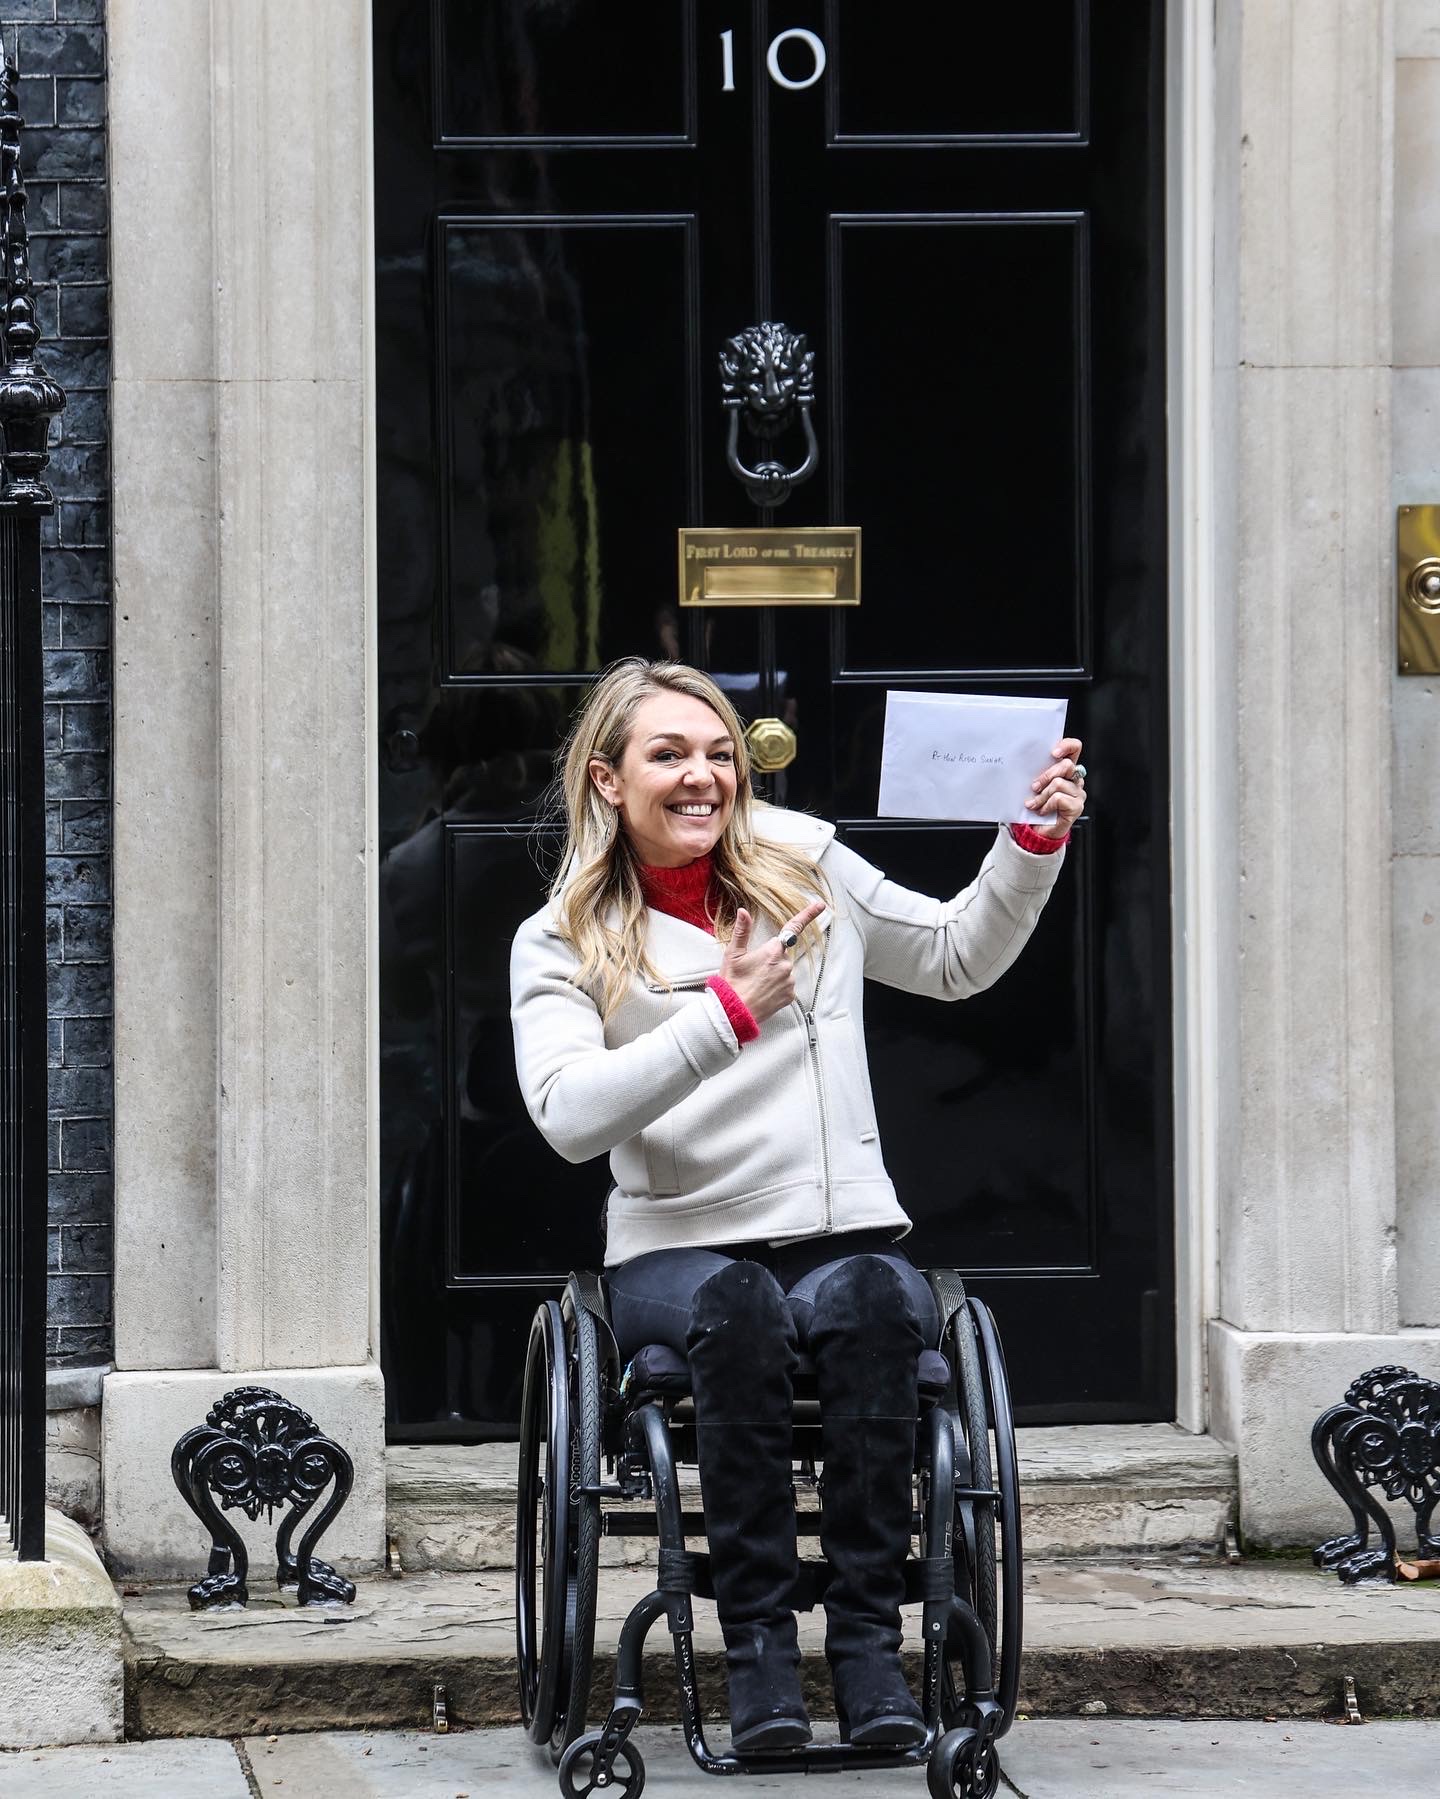 I'm a blonde woman in a manual wheelchair, sat on the steps on 10 Downing street holding an envelope and smiling.